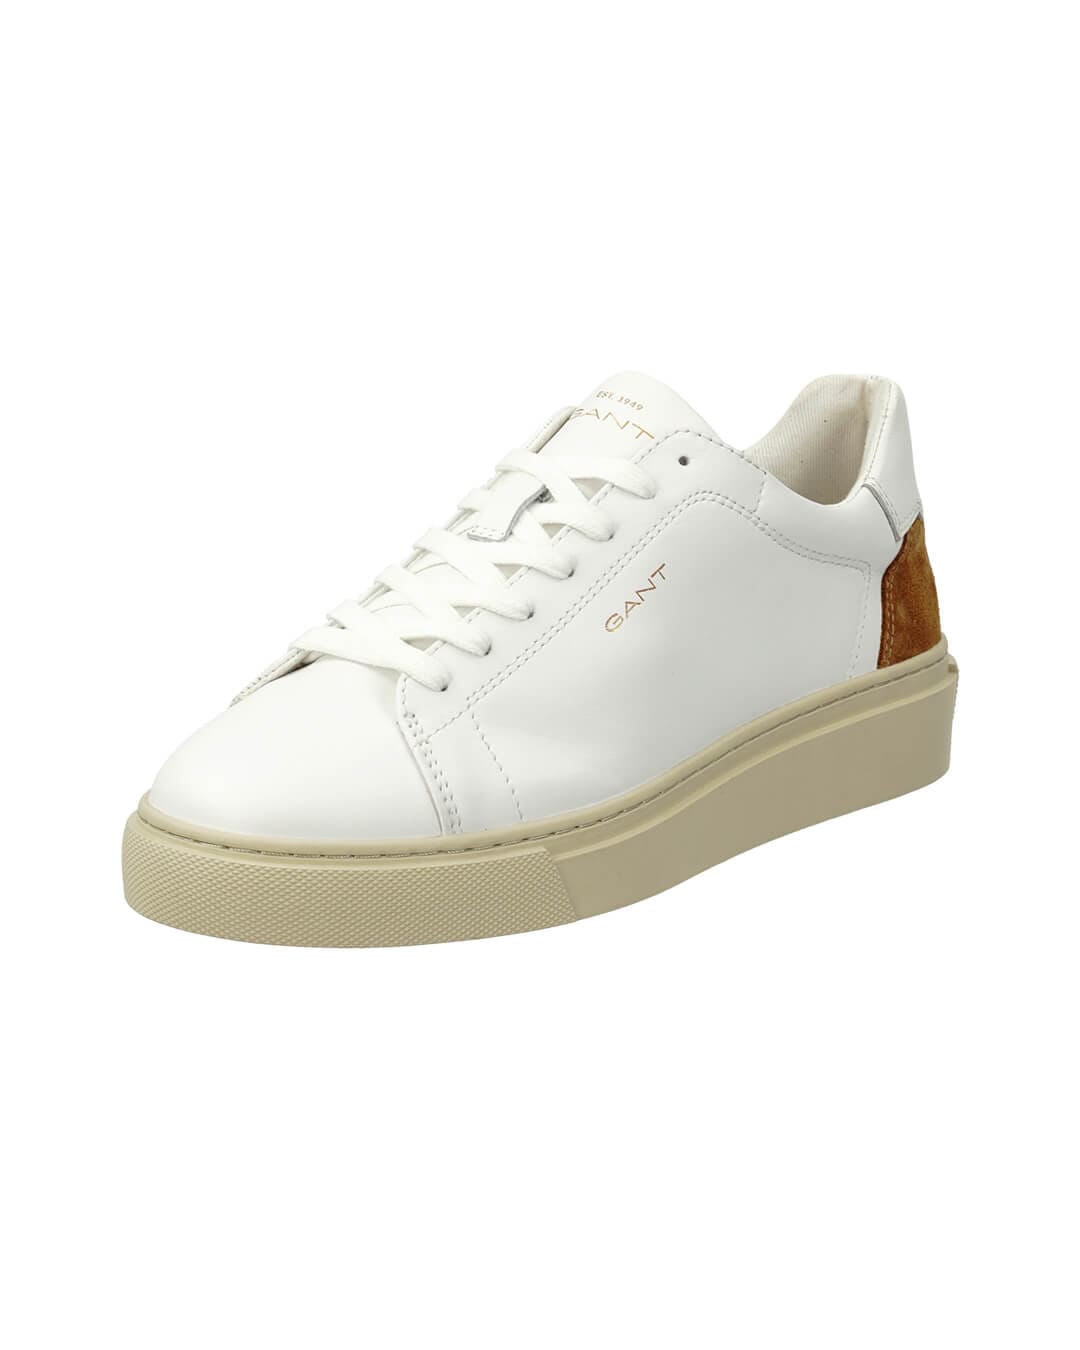 Gant Shoes Gant Off White And Brown Julice Sneakers